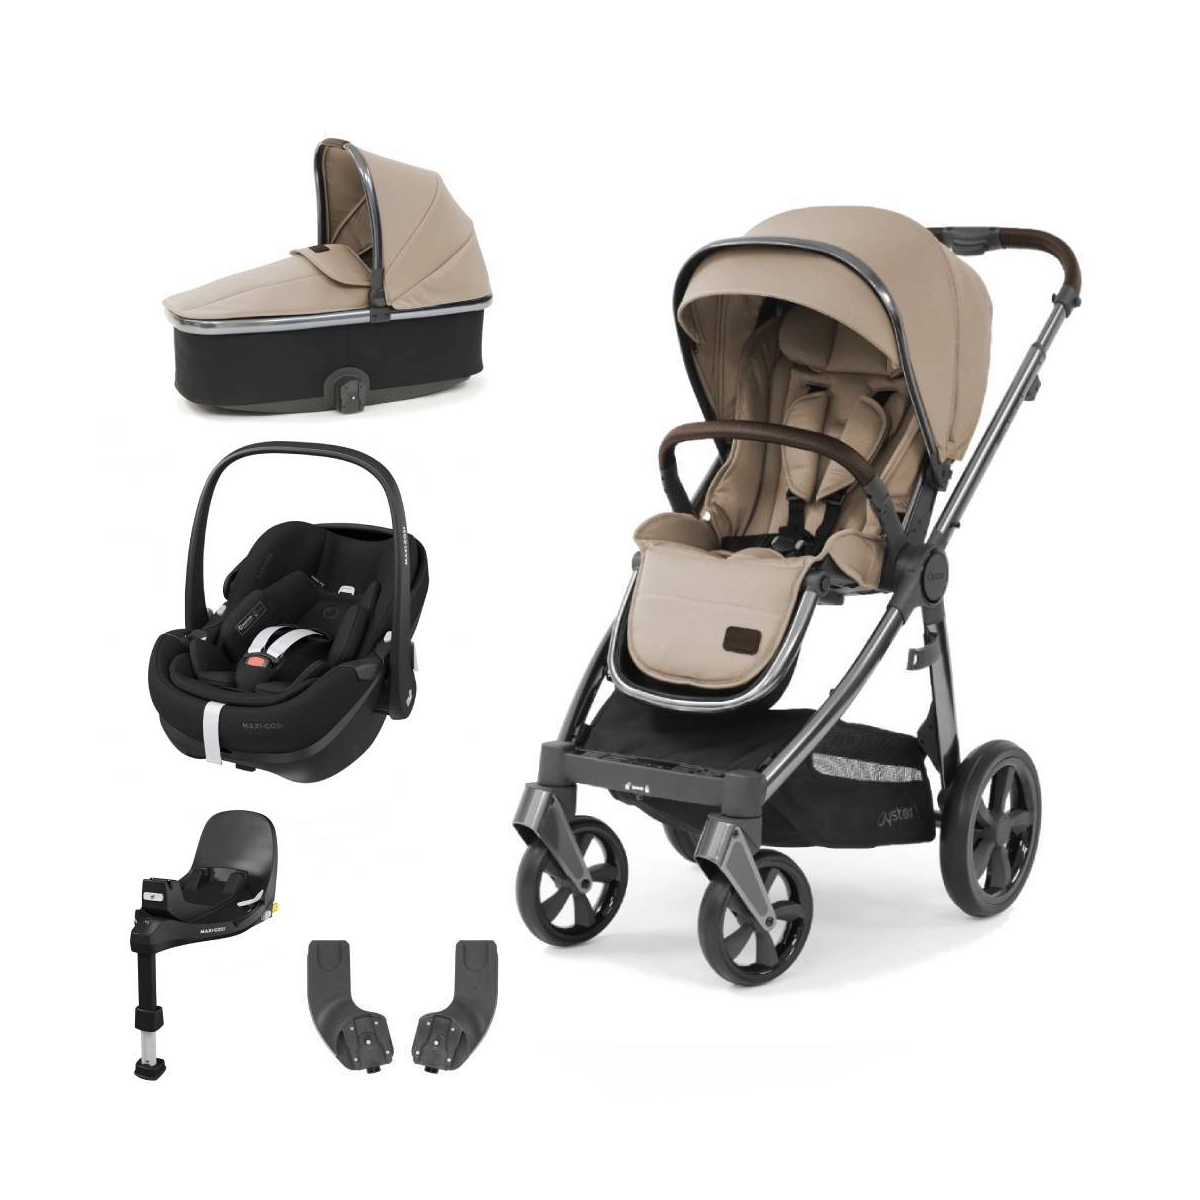 BabyStyle Oyster 3 Gun Metal Chassis Essential 5 Piece Bundle with Maxi Cosi Pebble 360 Pro Car Seat & Base